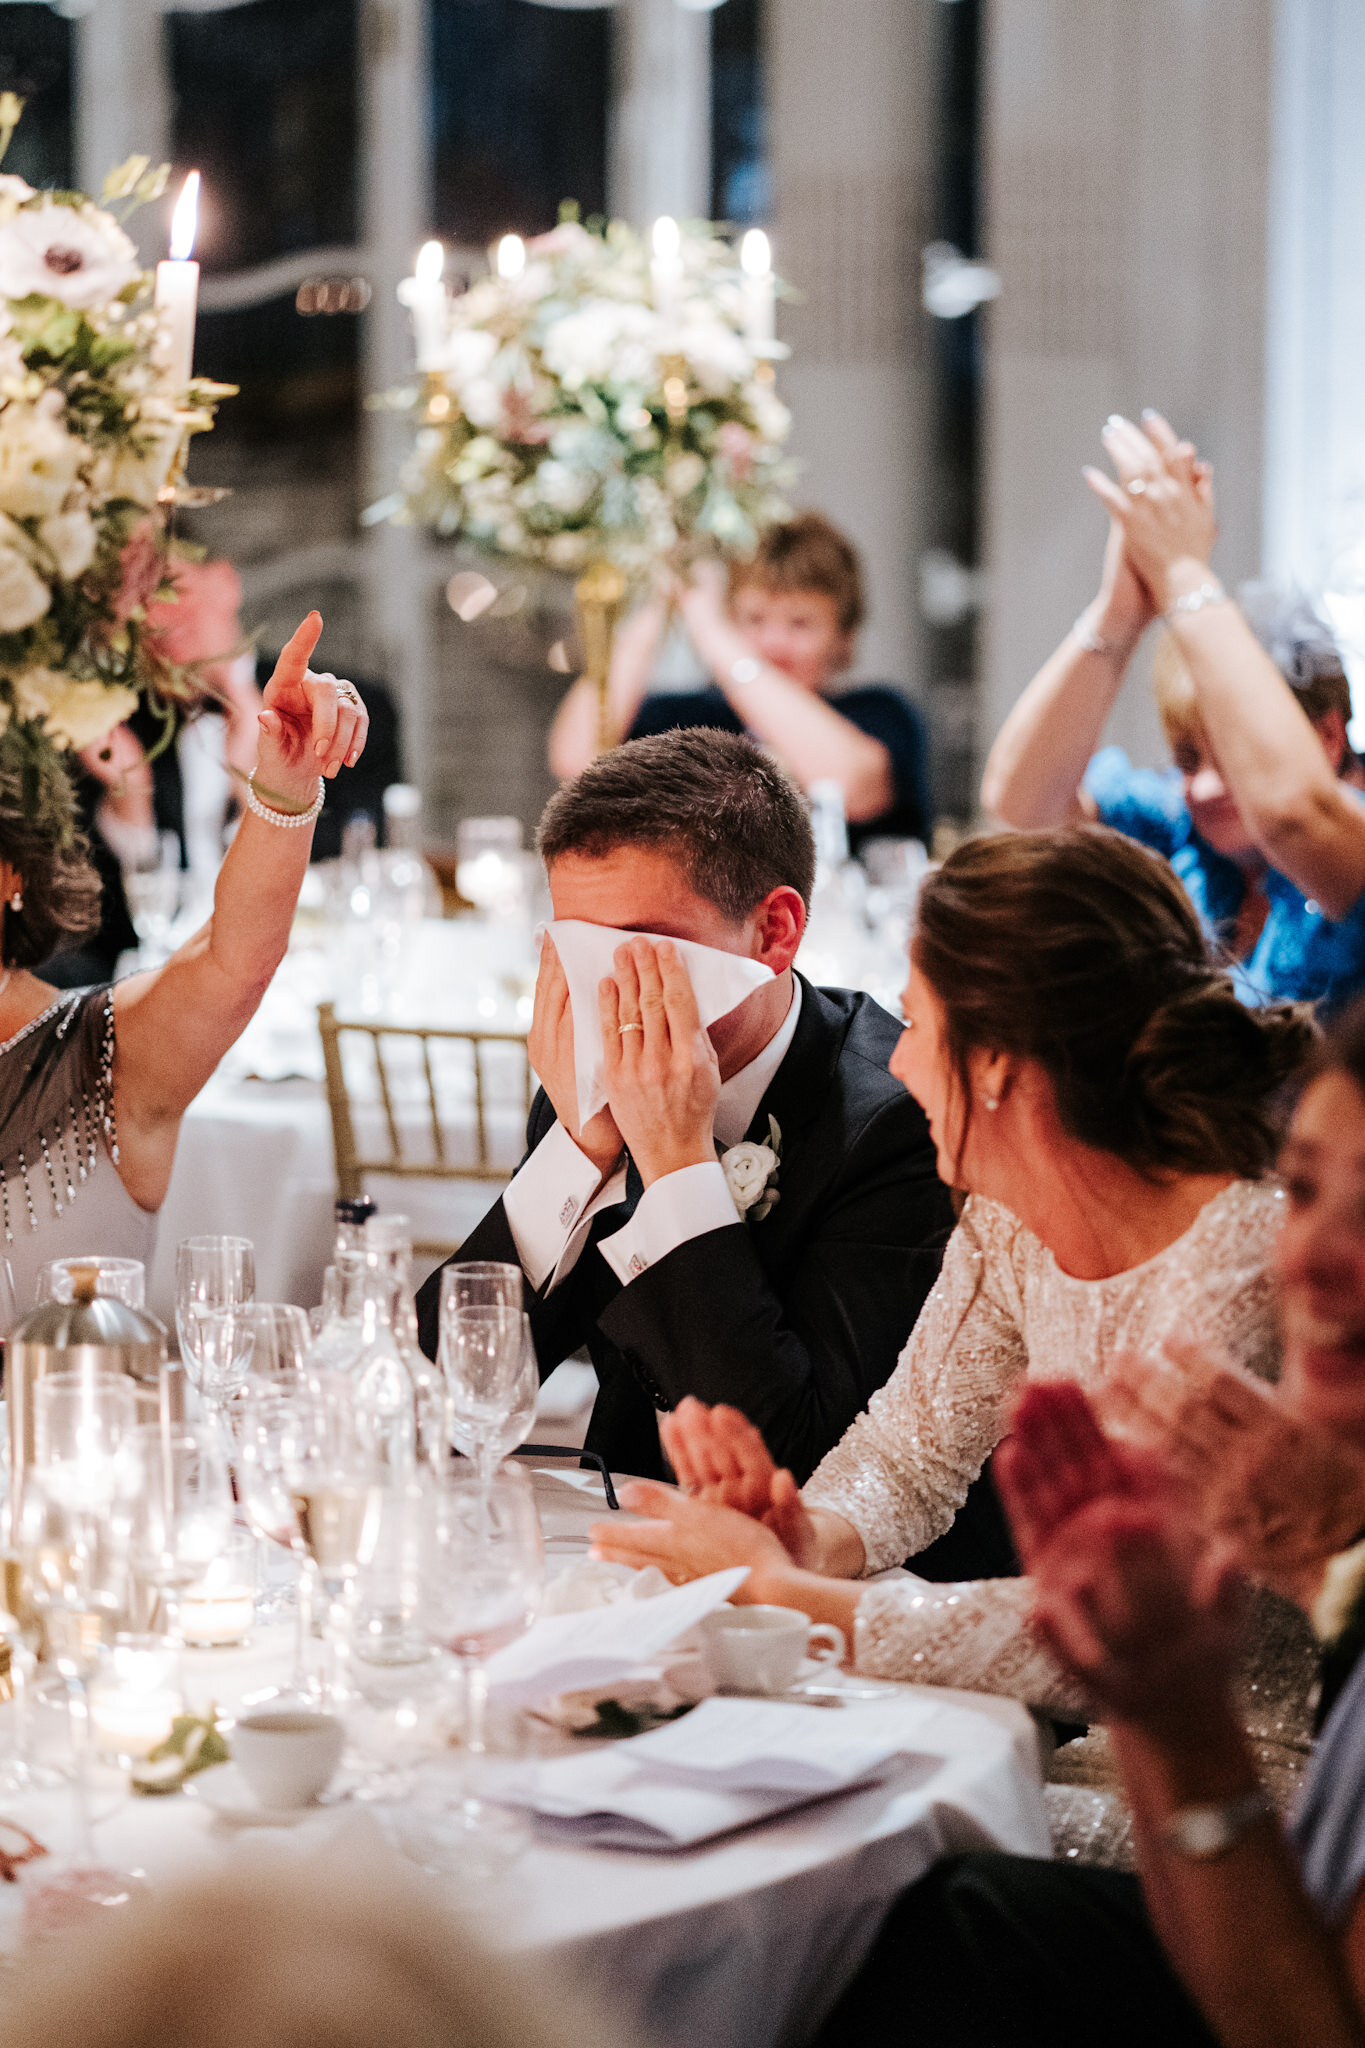 Groom wipes his tears as everyone around him claps while best man finishes his wedding speech